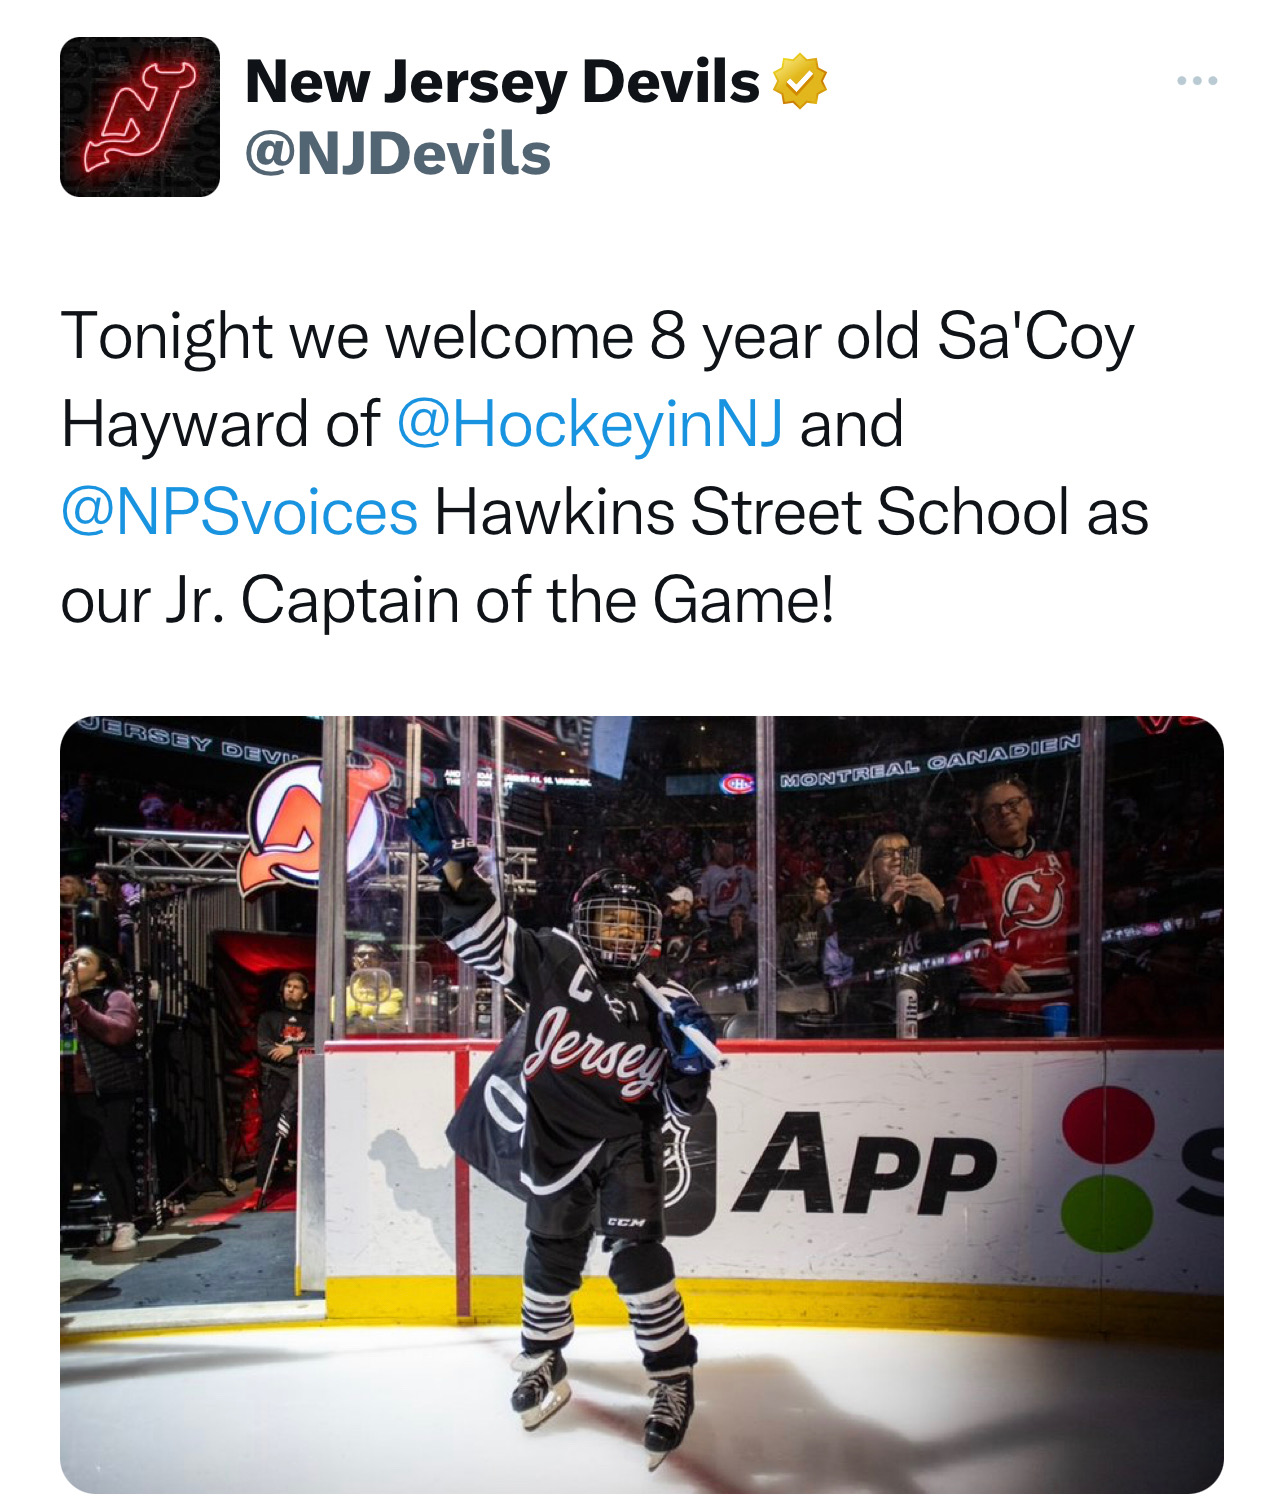 New jersey Devils Tonight we welcome 8 year old Sa'Coy Hayward of @HockeyinNJ and @NPSvoices Hawkins Street School as our Jr. Captain of the game!